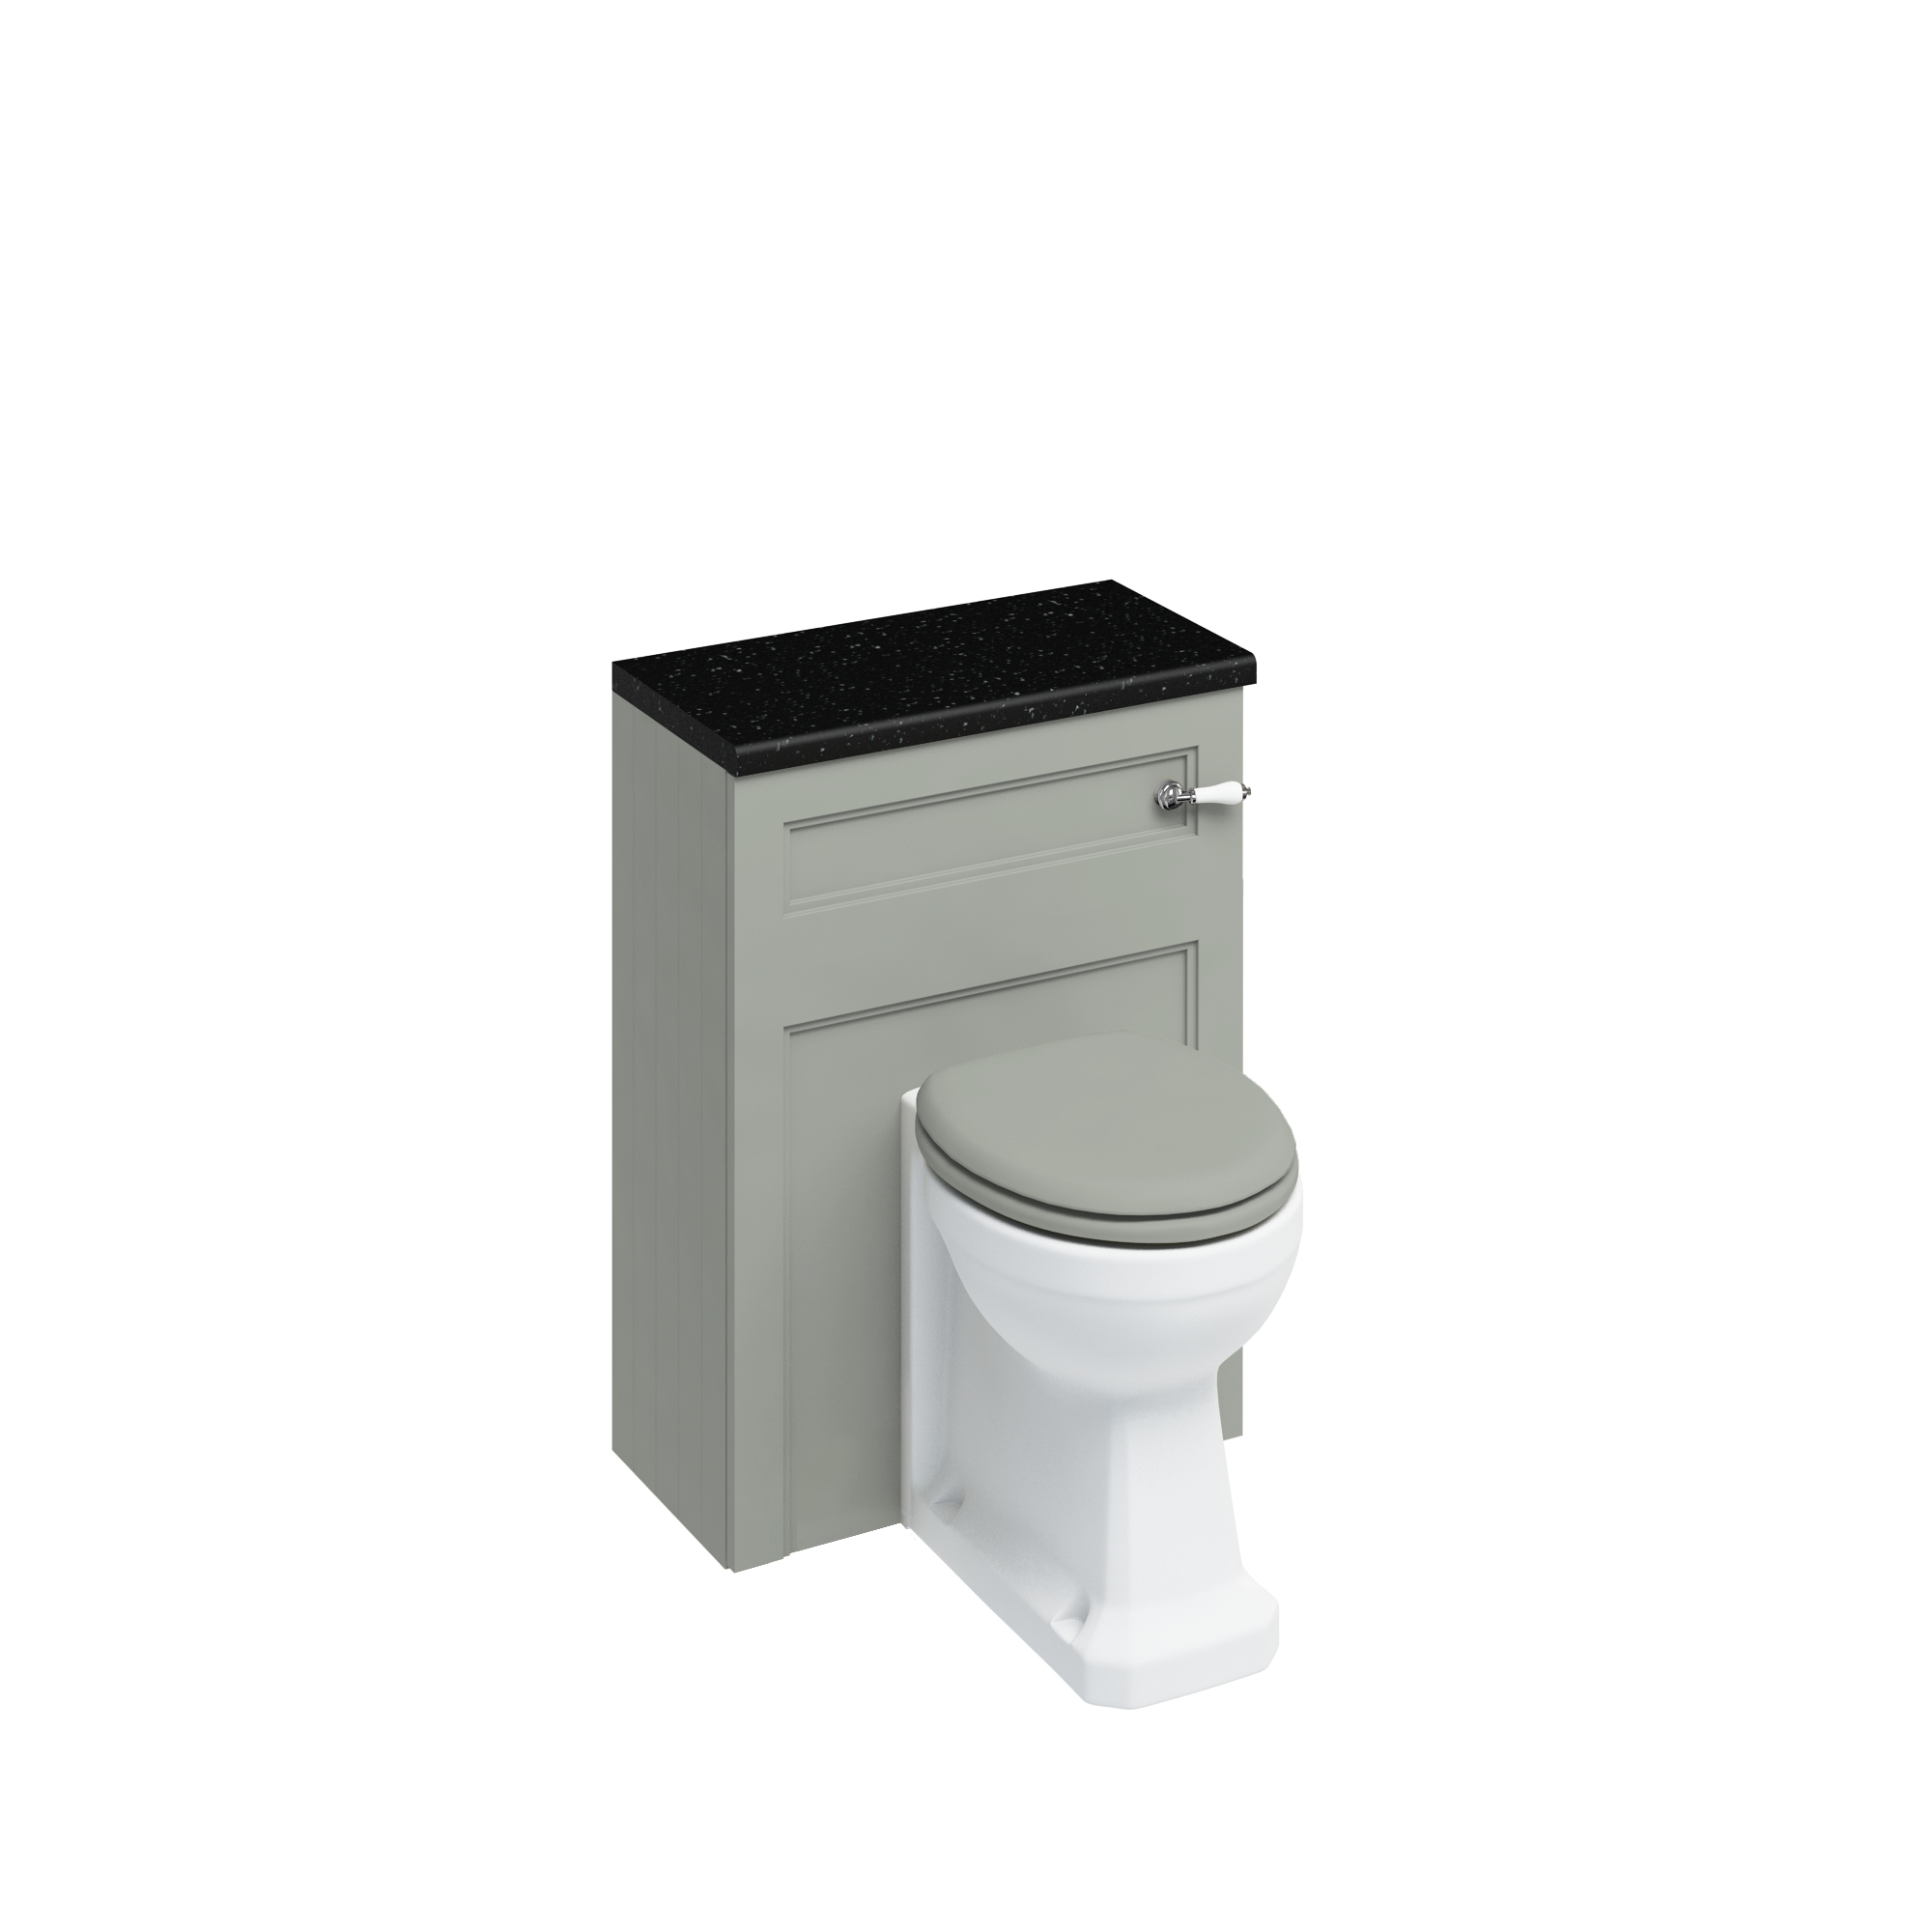 60 Back to Wall WC Unit and back-to-wall pan (including the cistern tank) - Dark Olive